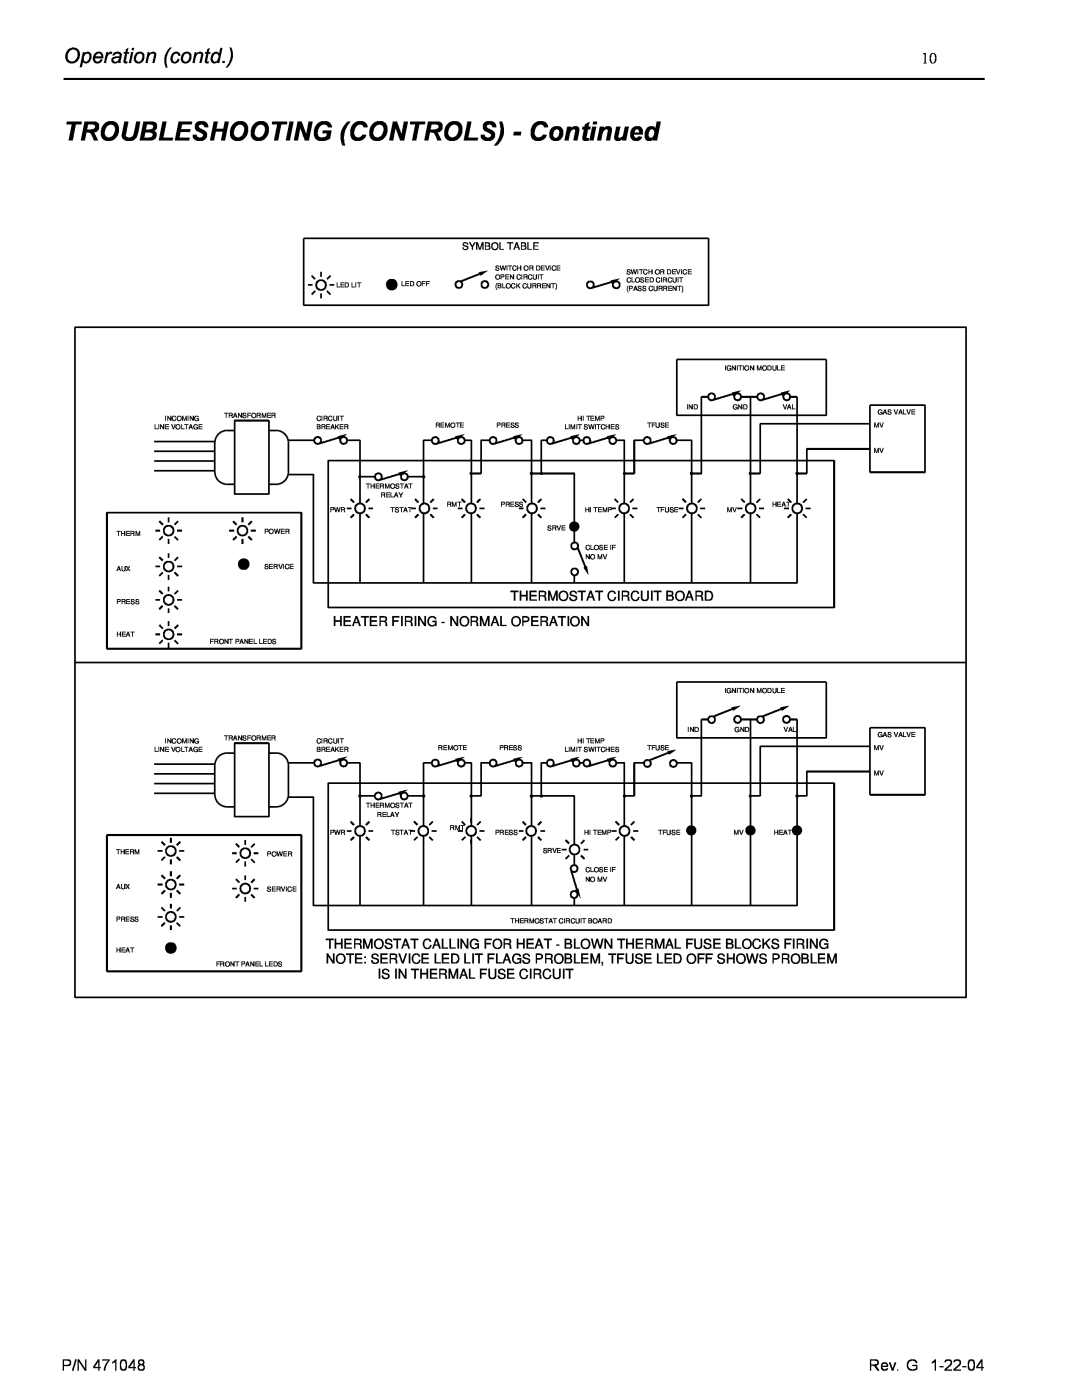 Pentair 100 installation manual TROUBLESHOOTING CONTROLS - Continued, Operation contd, Is In Thermal Fuse Circuit 